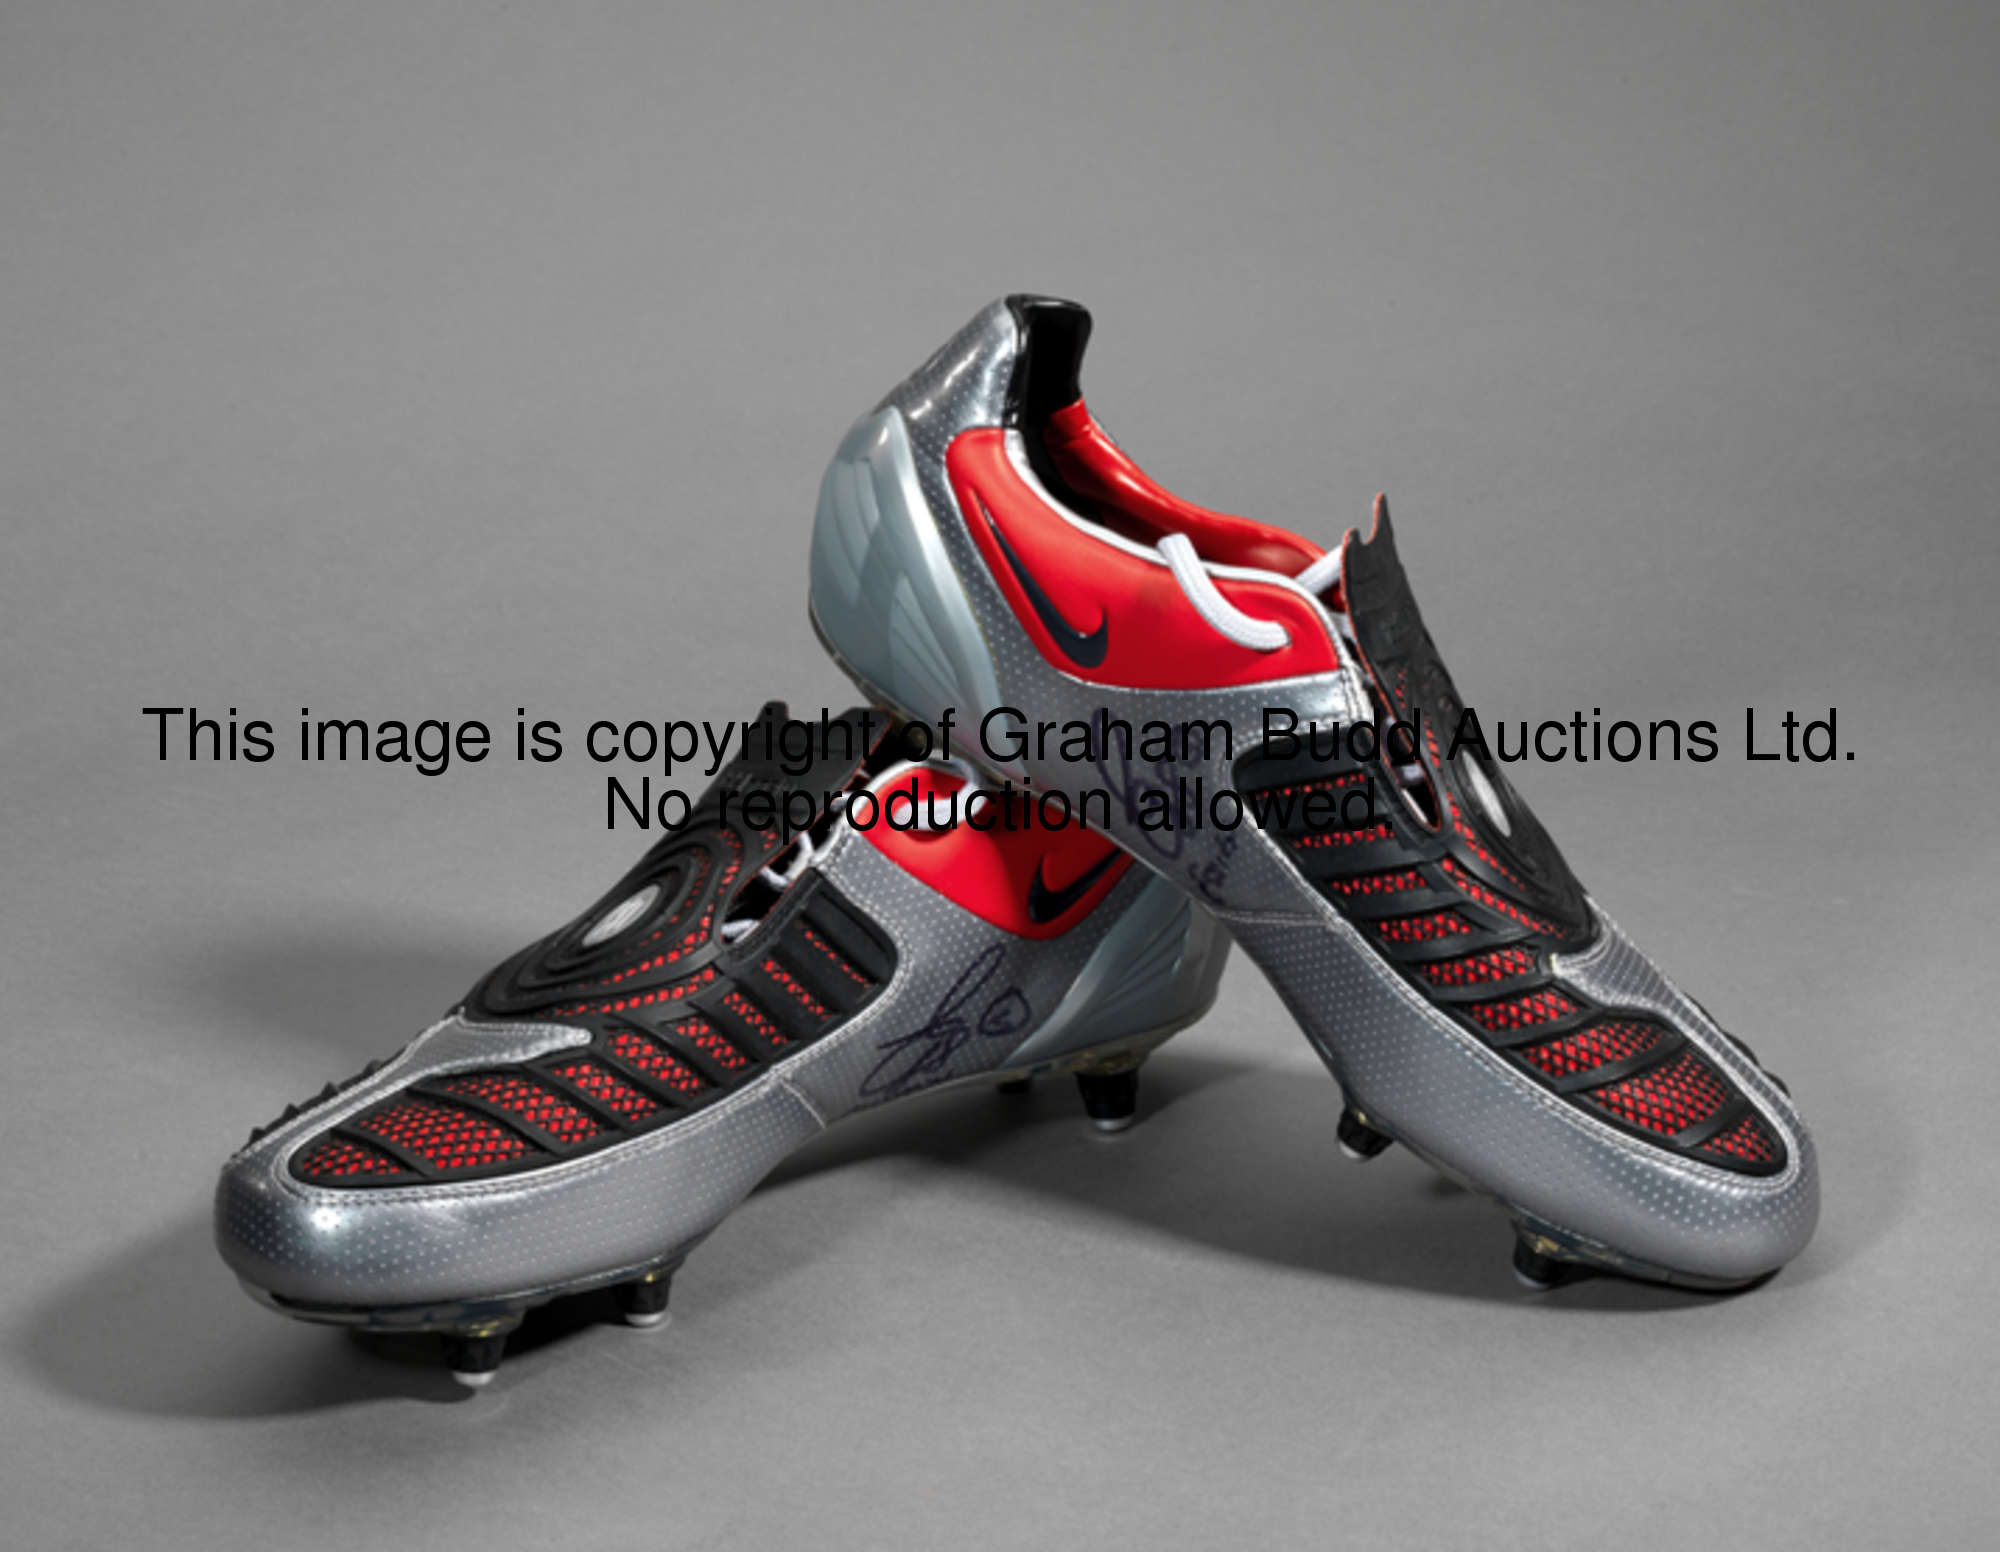 Michael Essien: a signed pair of football boots, silver, black & red Nike Total Ninety boots inscrib...